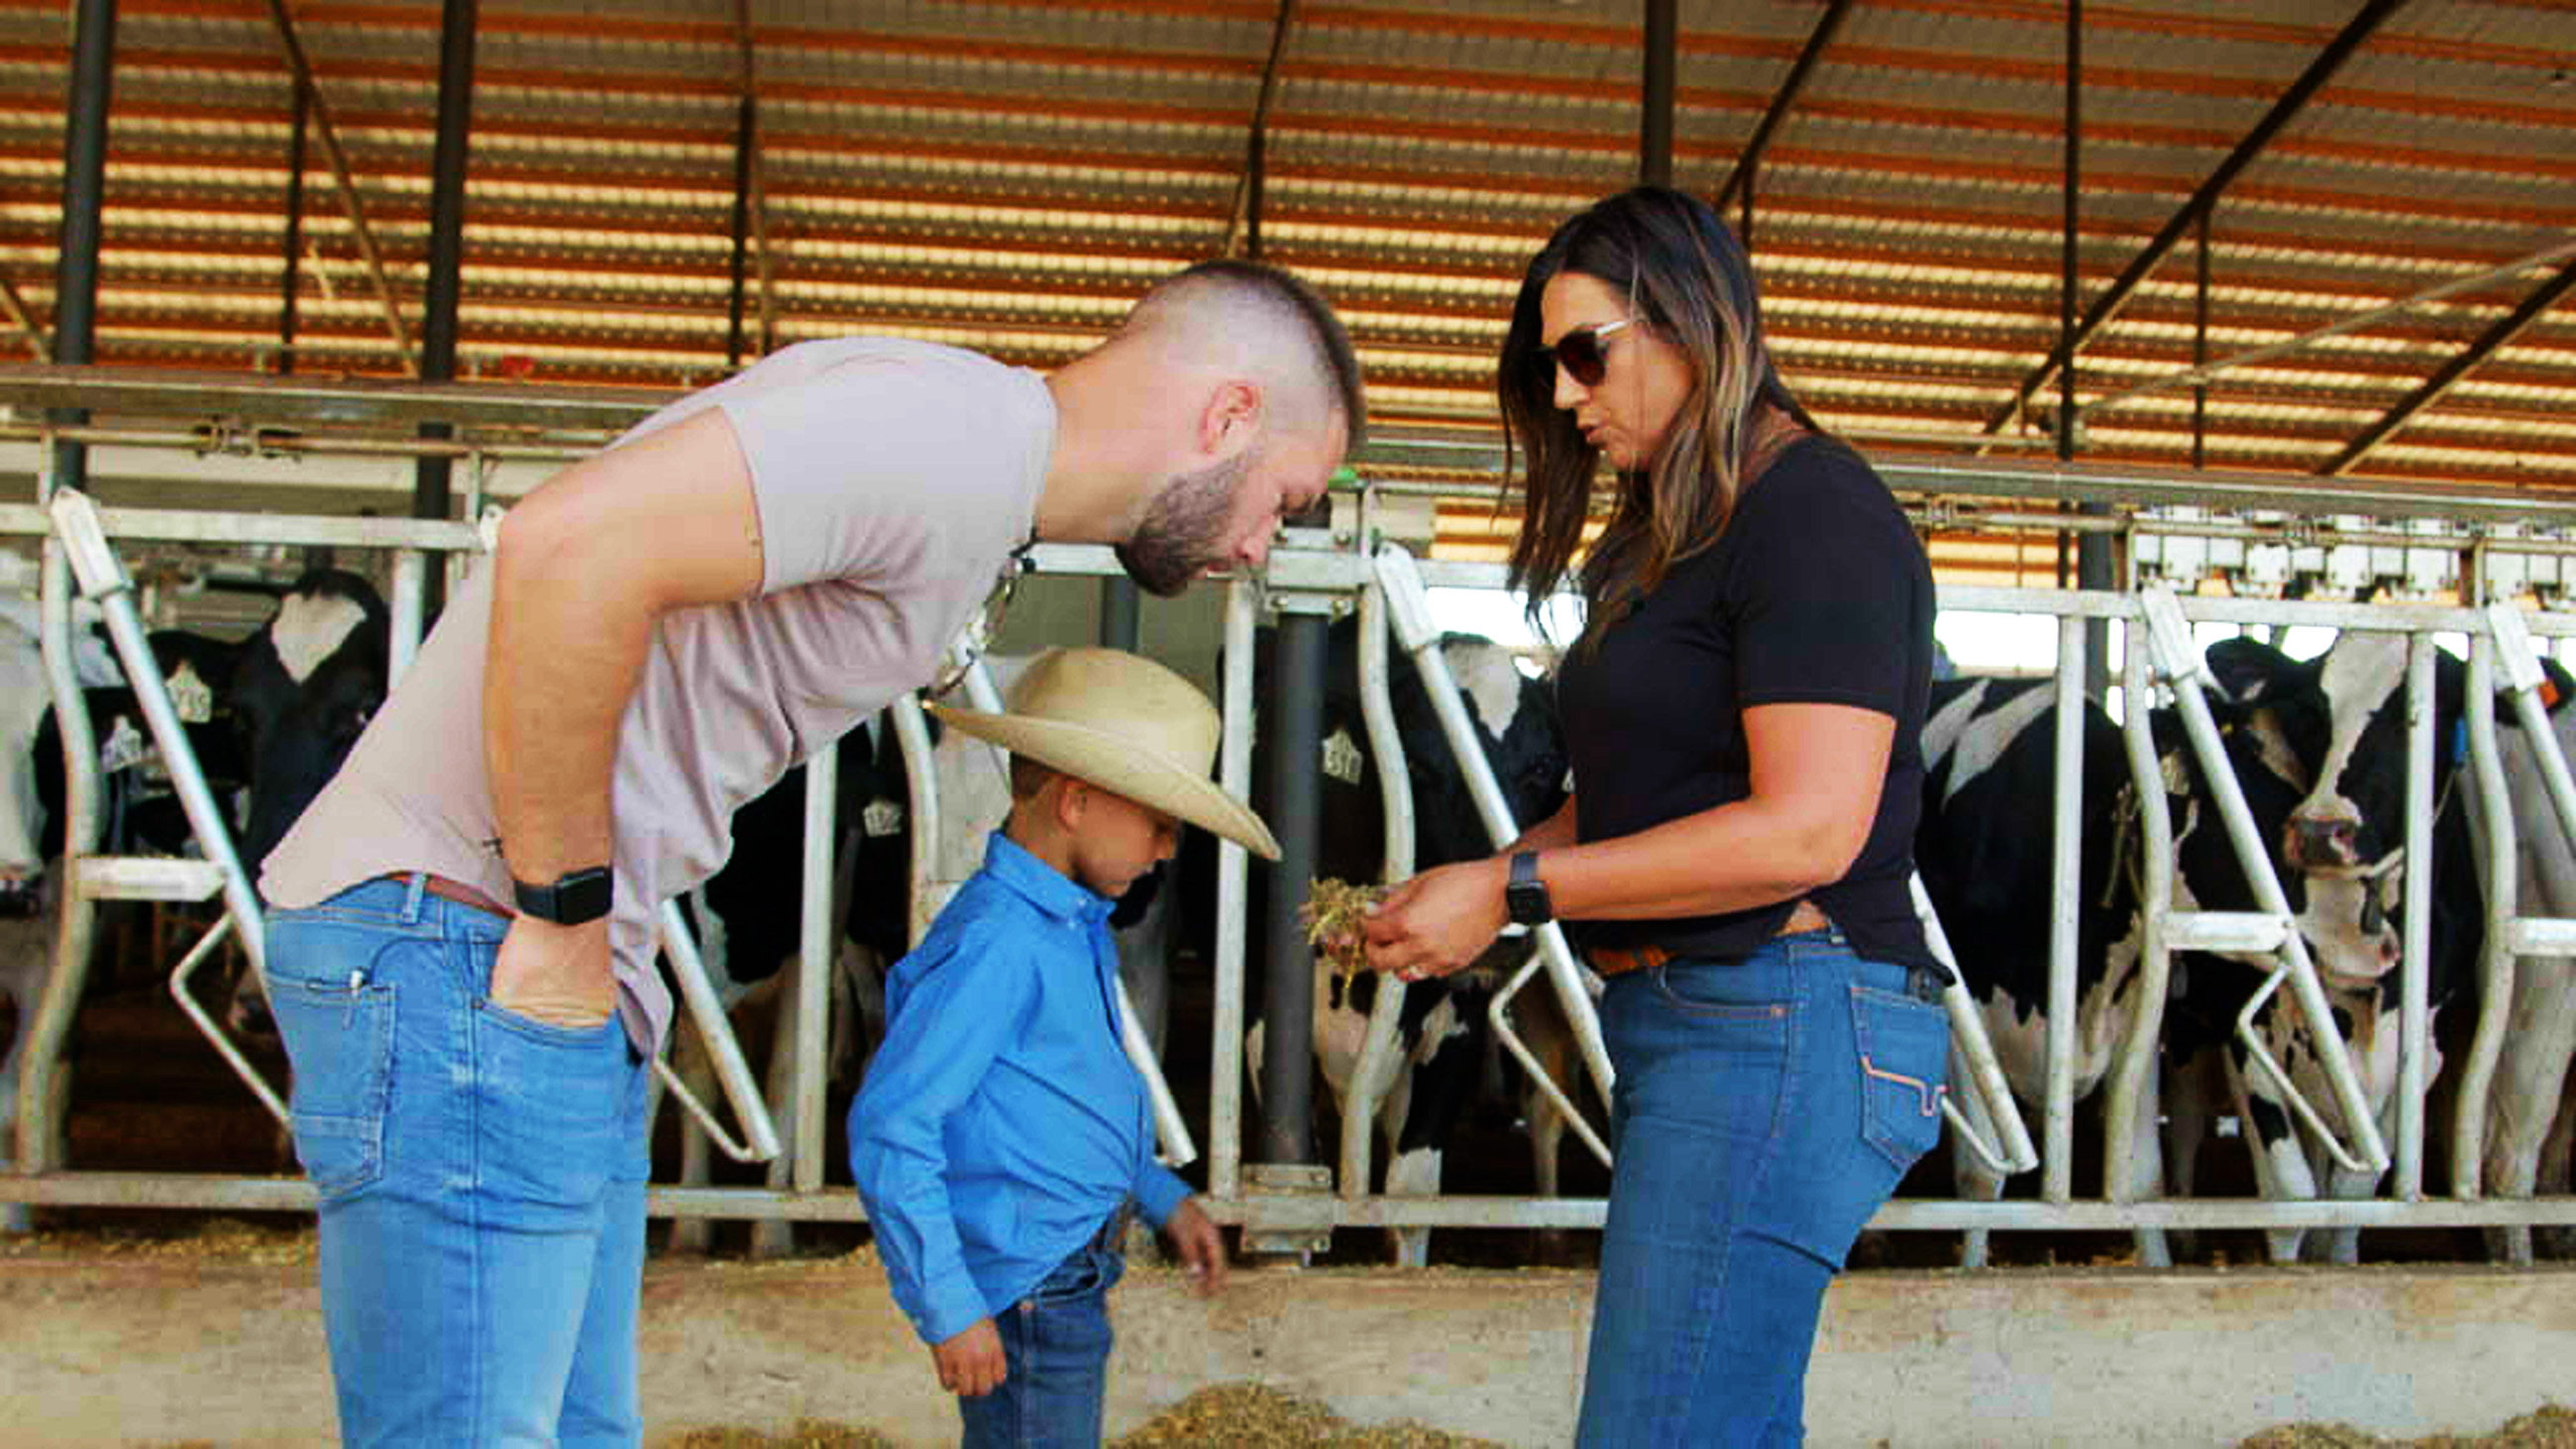 Megan Silva explains the careful formulation of a dairy cow's diet to Jordan Mazur at R&S Dairy in Escalon, CA.